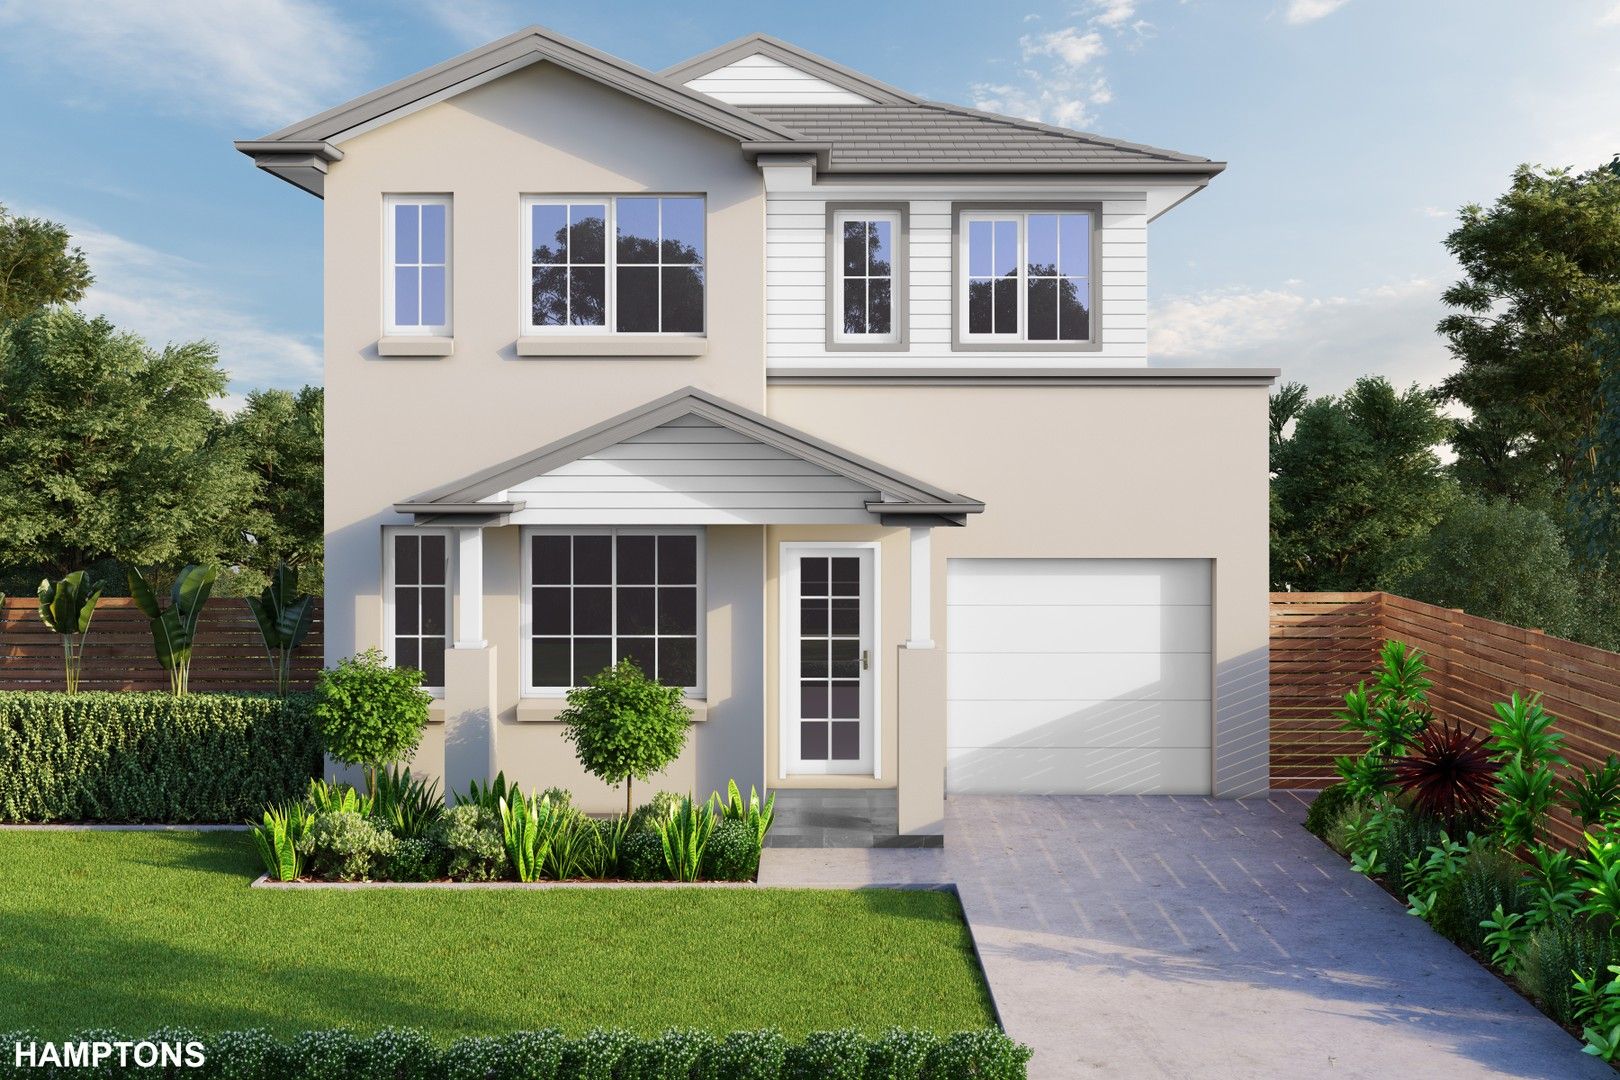 4 bedrooms New House & Land in Lot 28 Meering Street AUSTRAL NSW, 2179